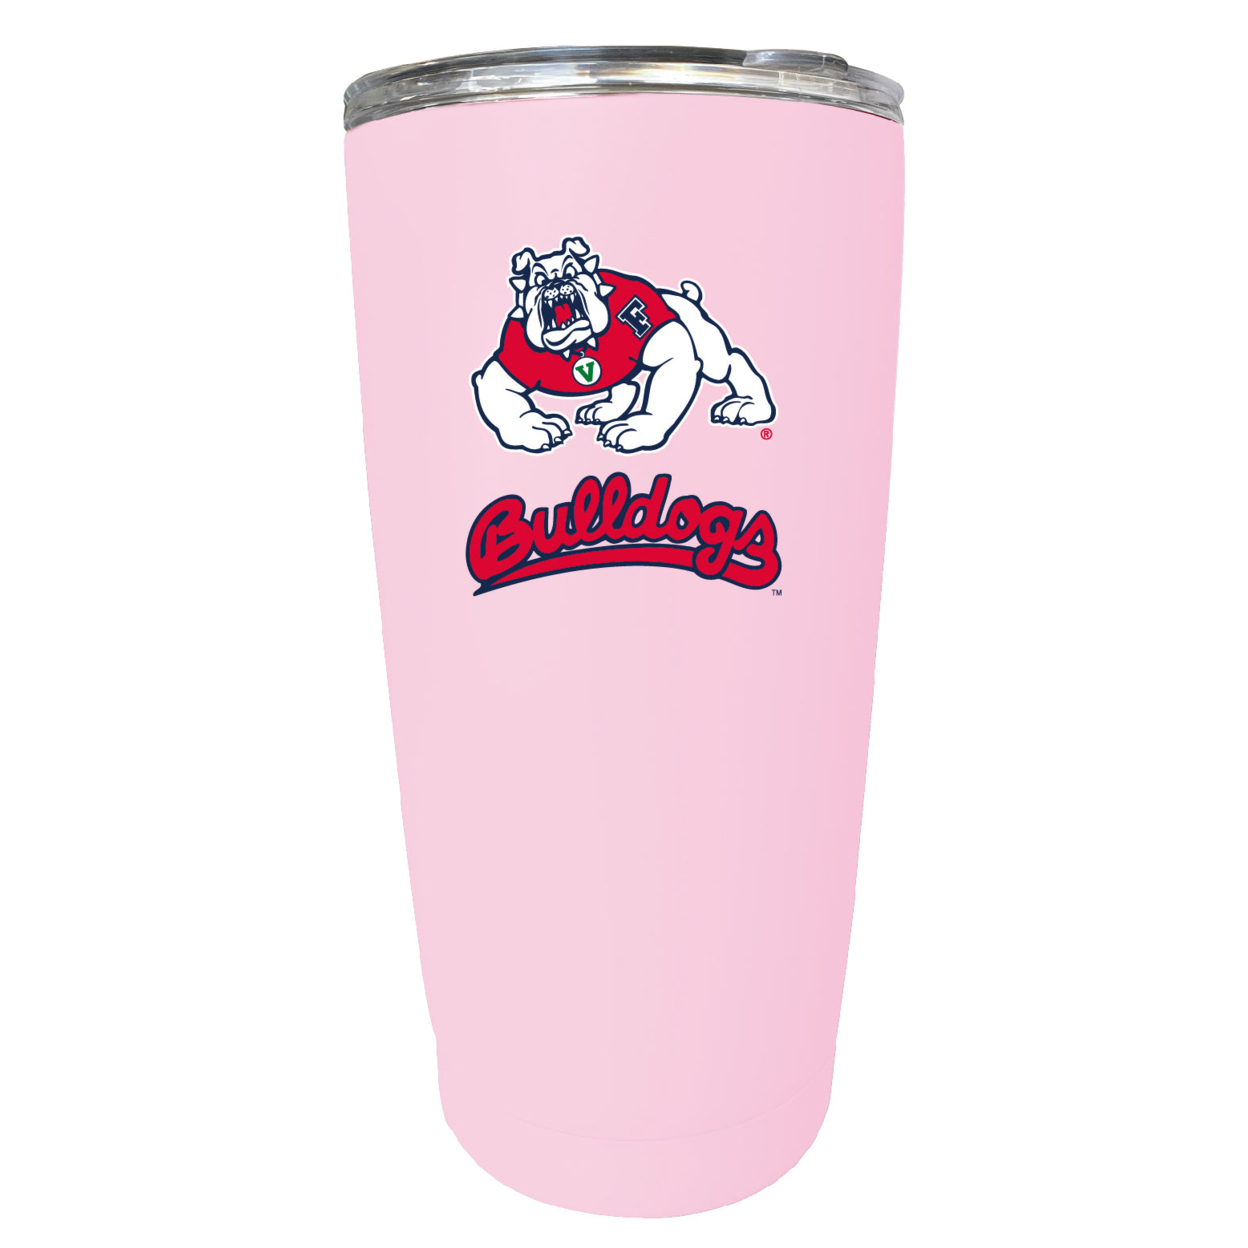 Fresno State Bulldogs 16 Oz Stainless Steel Insulated Tumbler - Pink